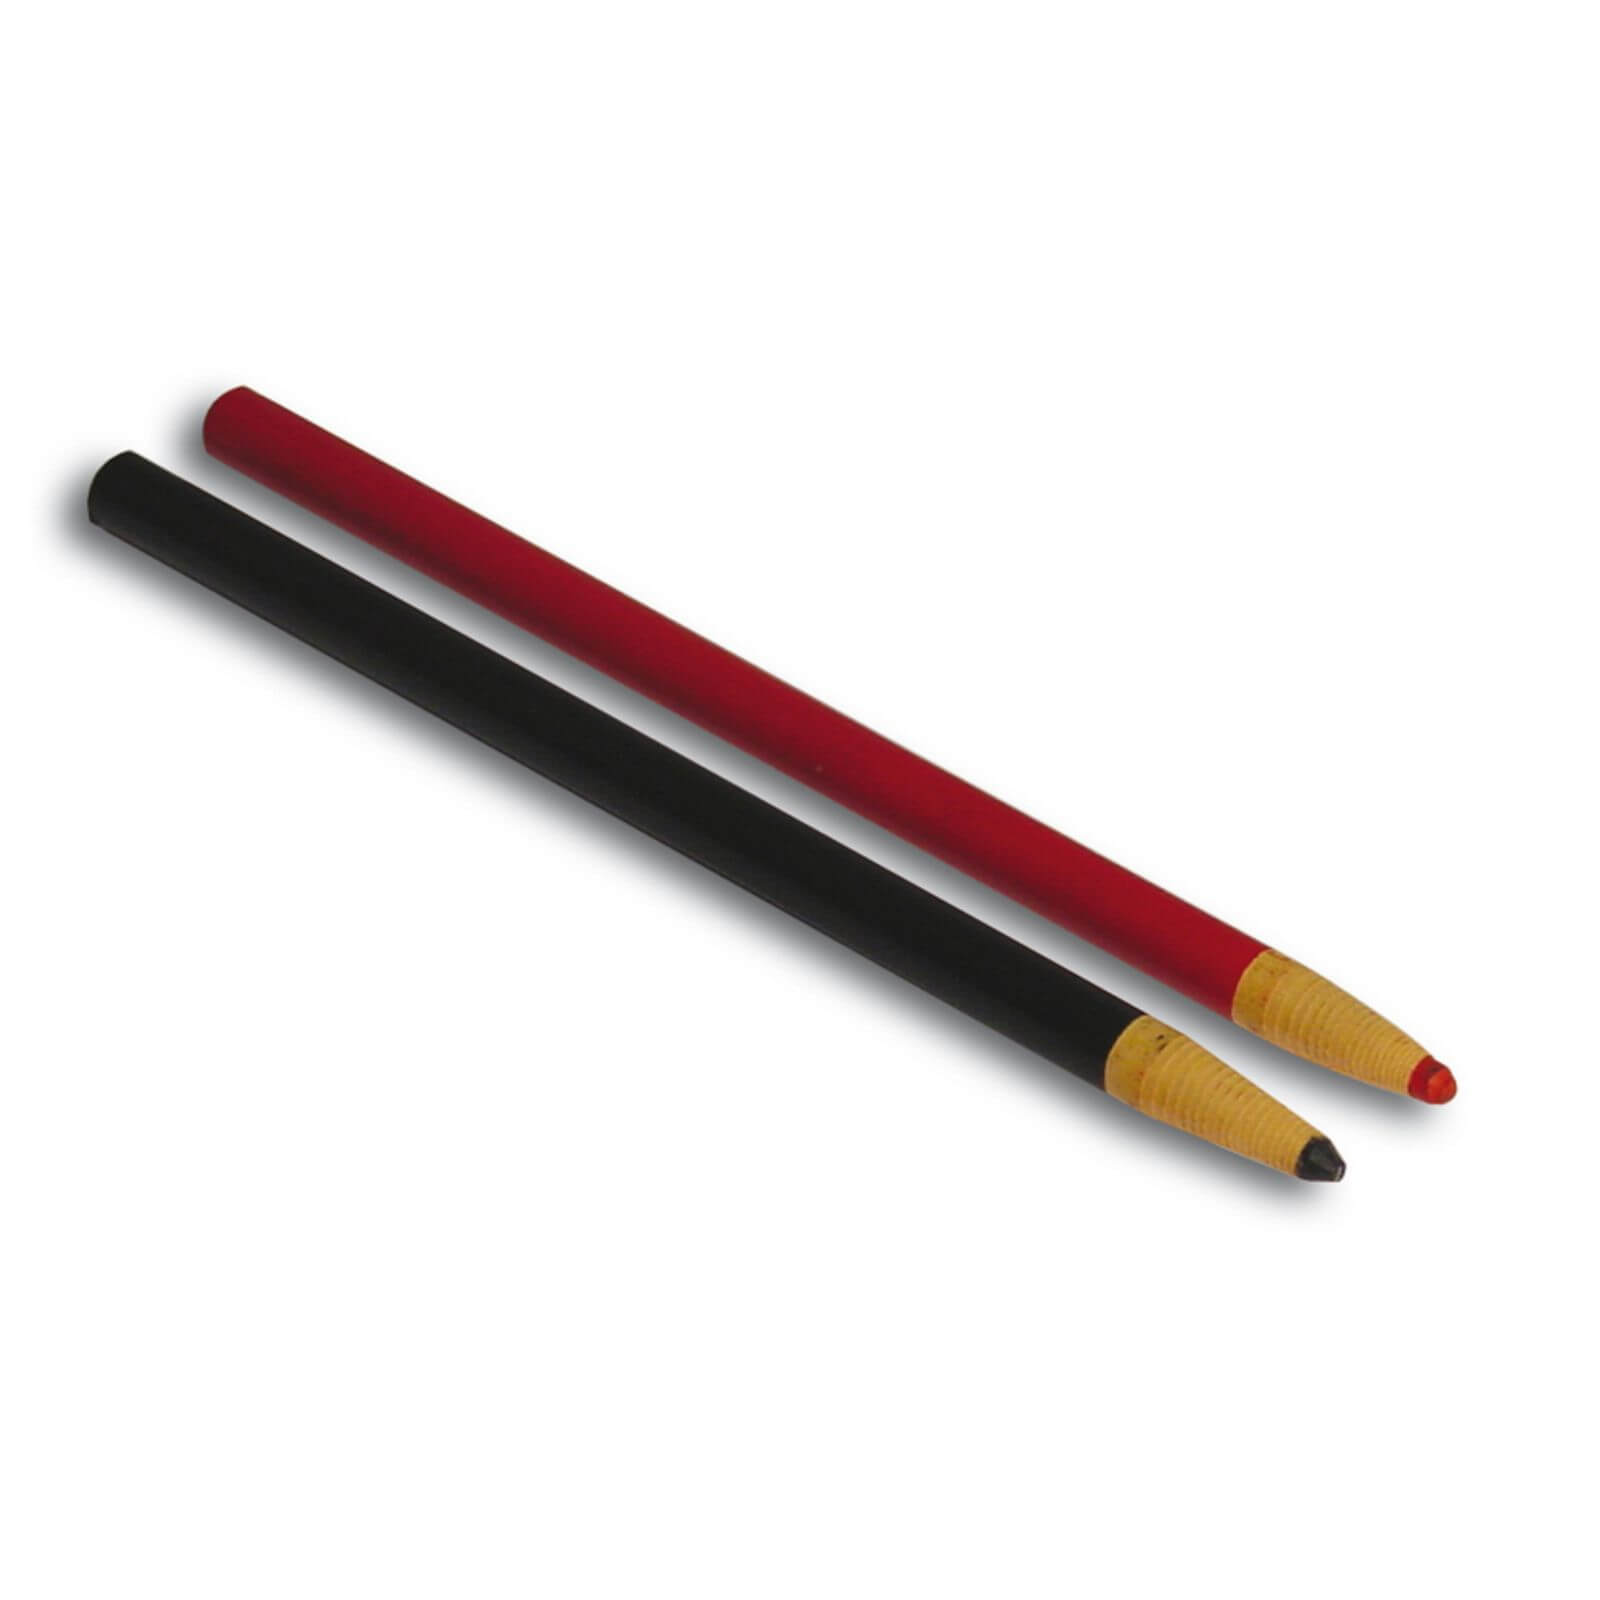 Photo of Vitrex Tile Markers - Black & Red - 2 Pack